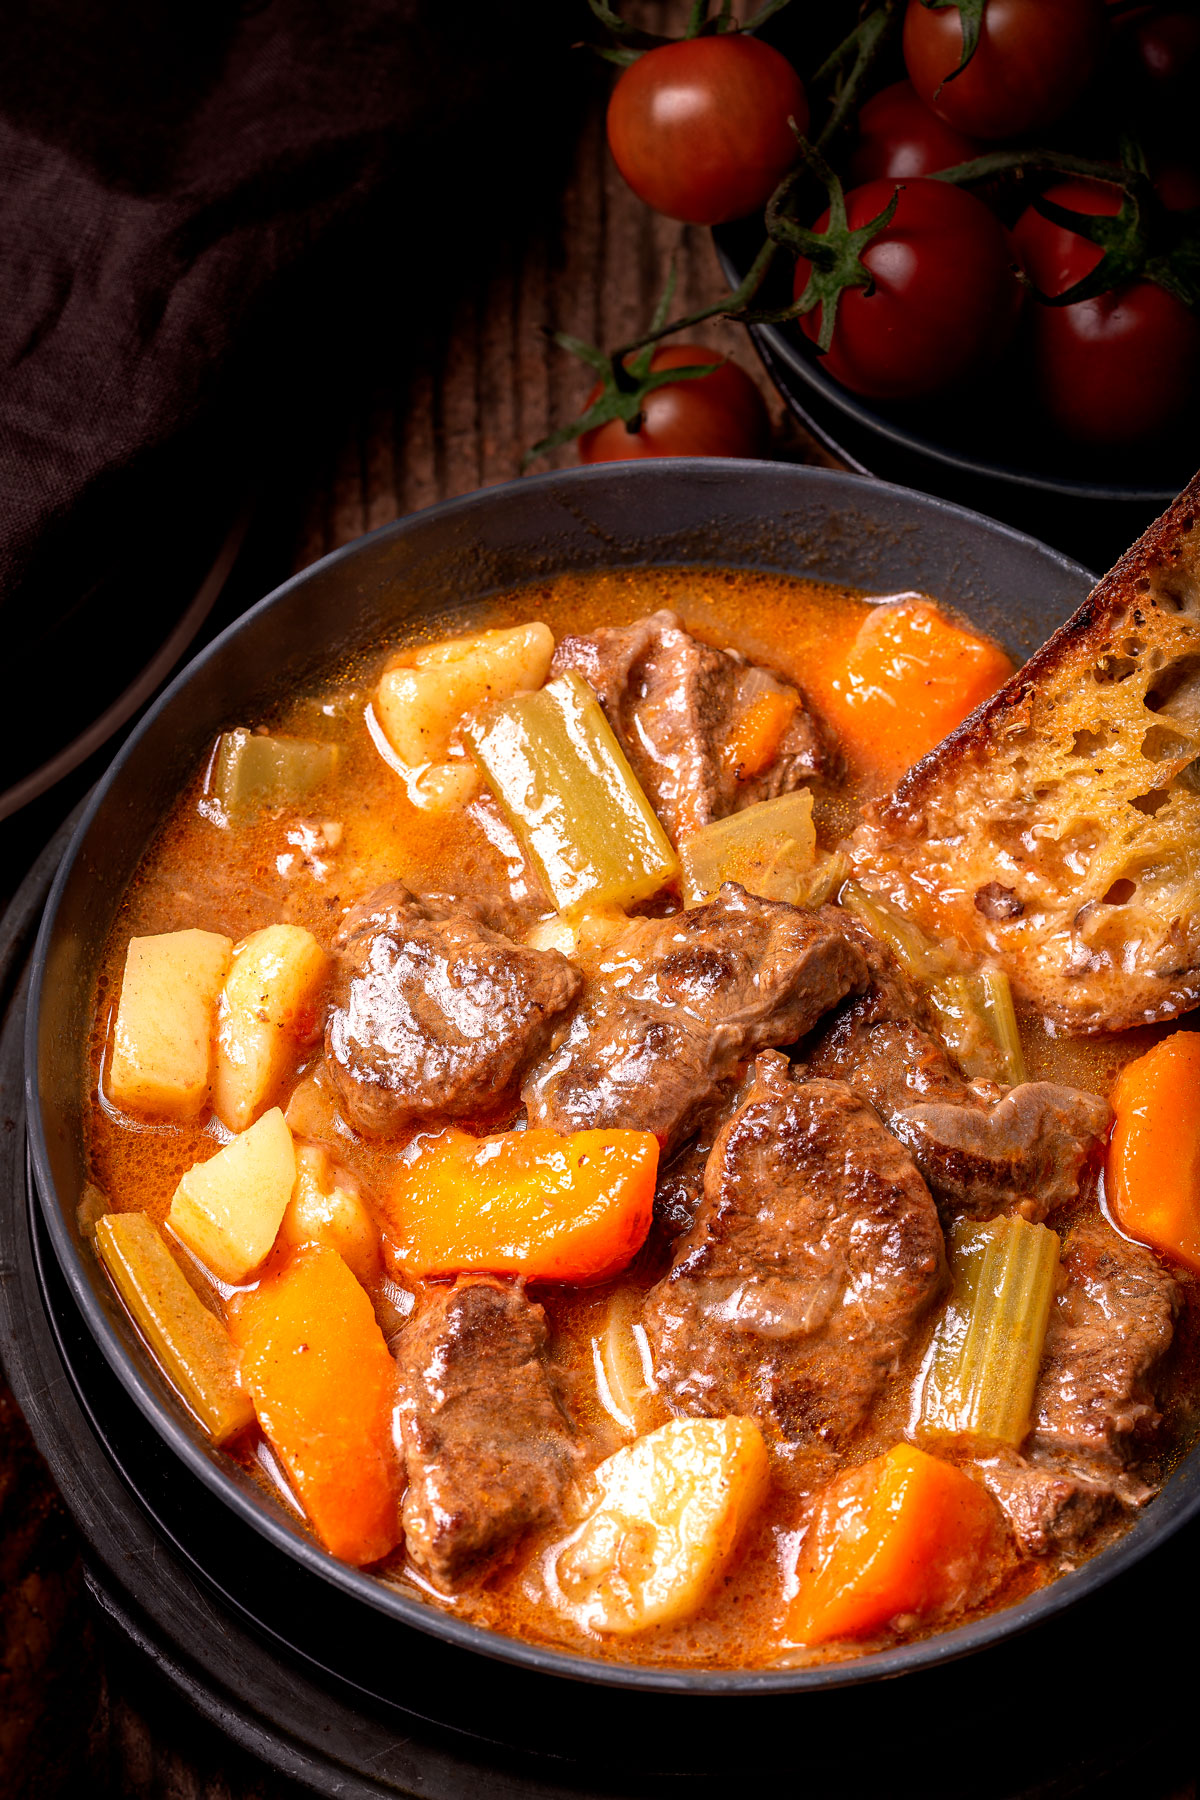 Image of Beef Shank Stew in a bowl with the toasted bread.